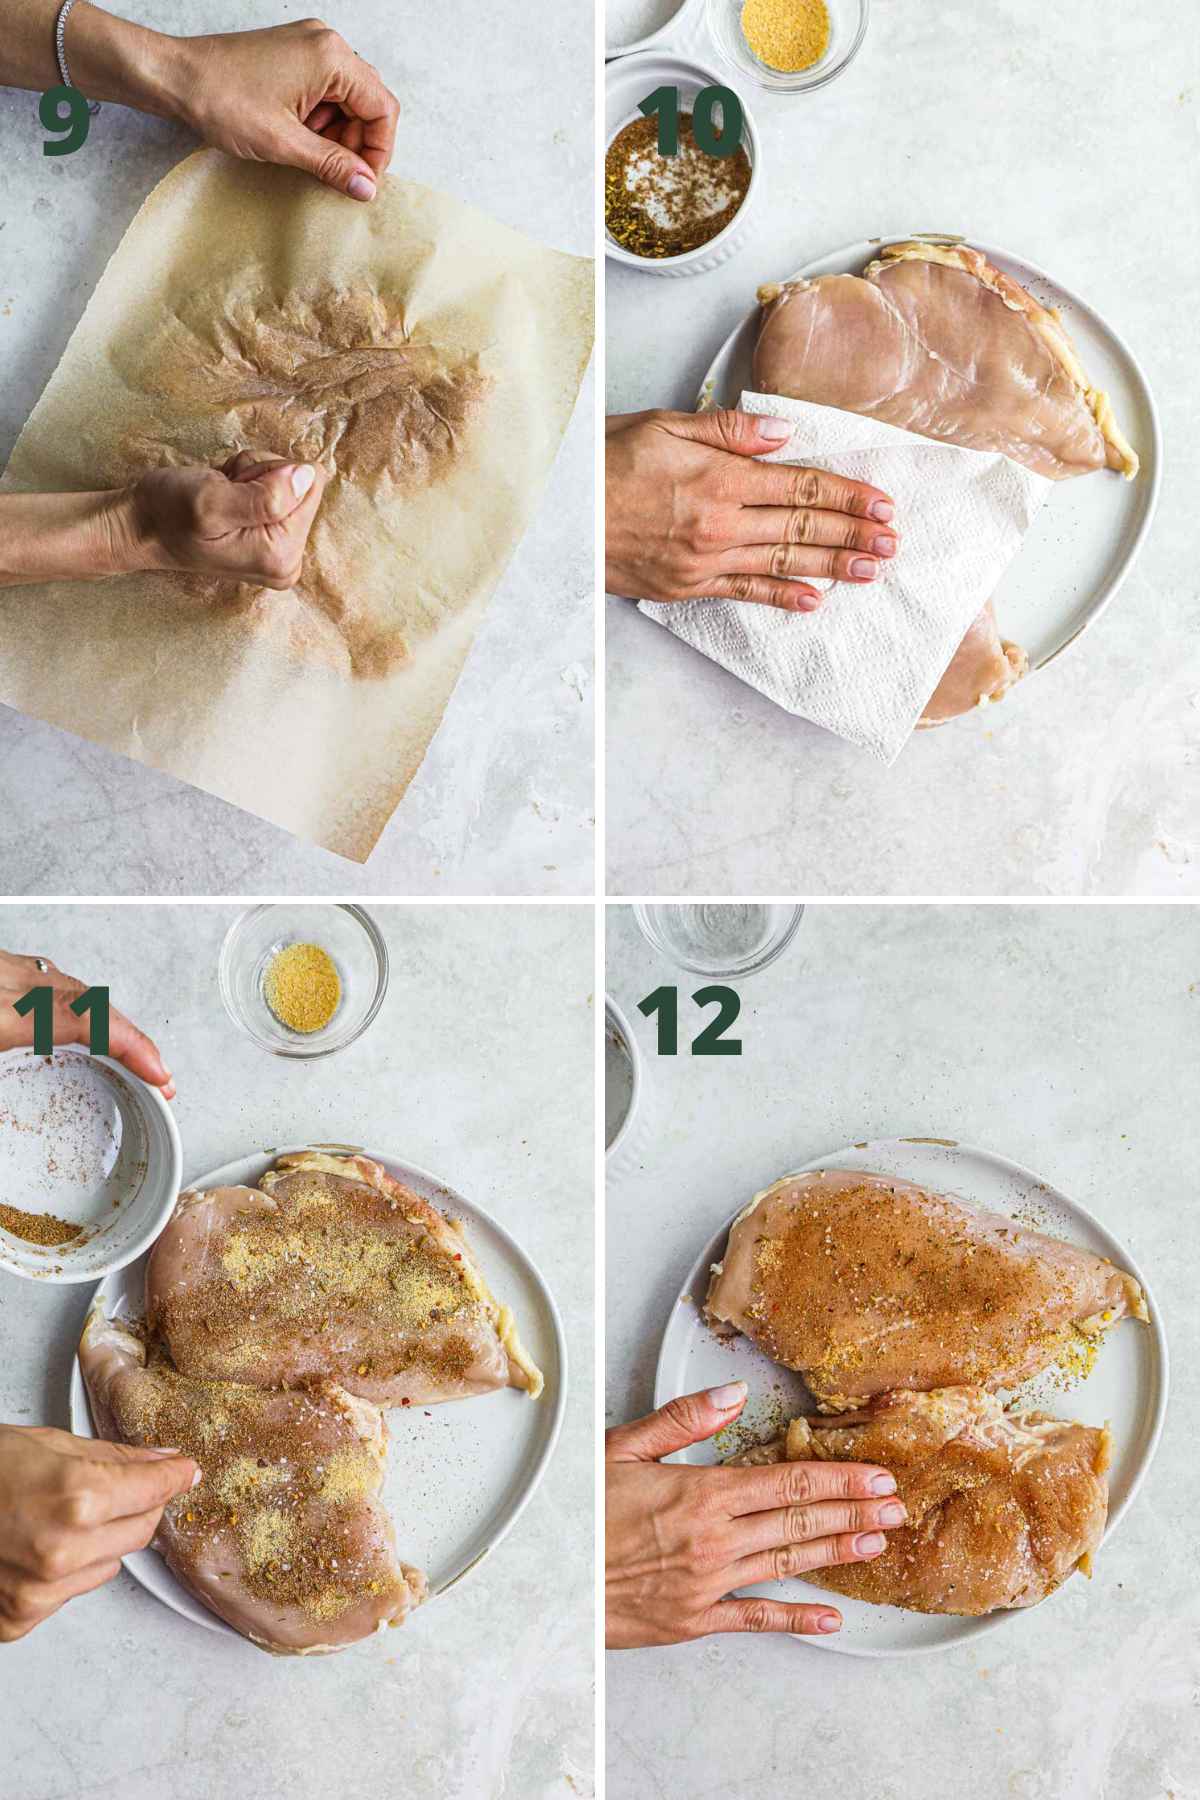 Steps to make cast iron skillet chicken, tenderize chicken, pat dry, season, and rub seasoning into chicken breasts.